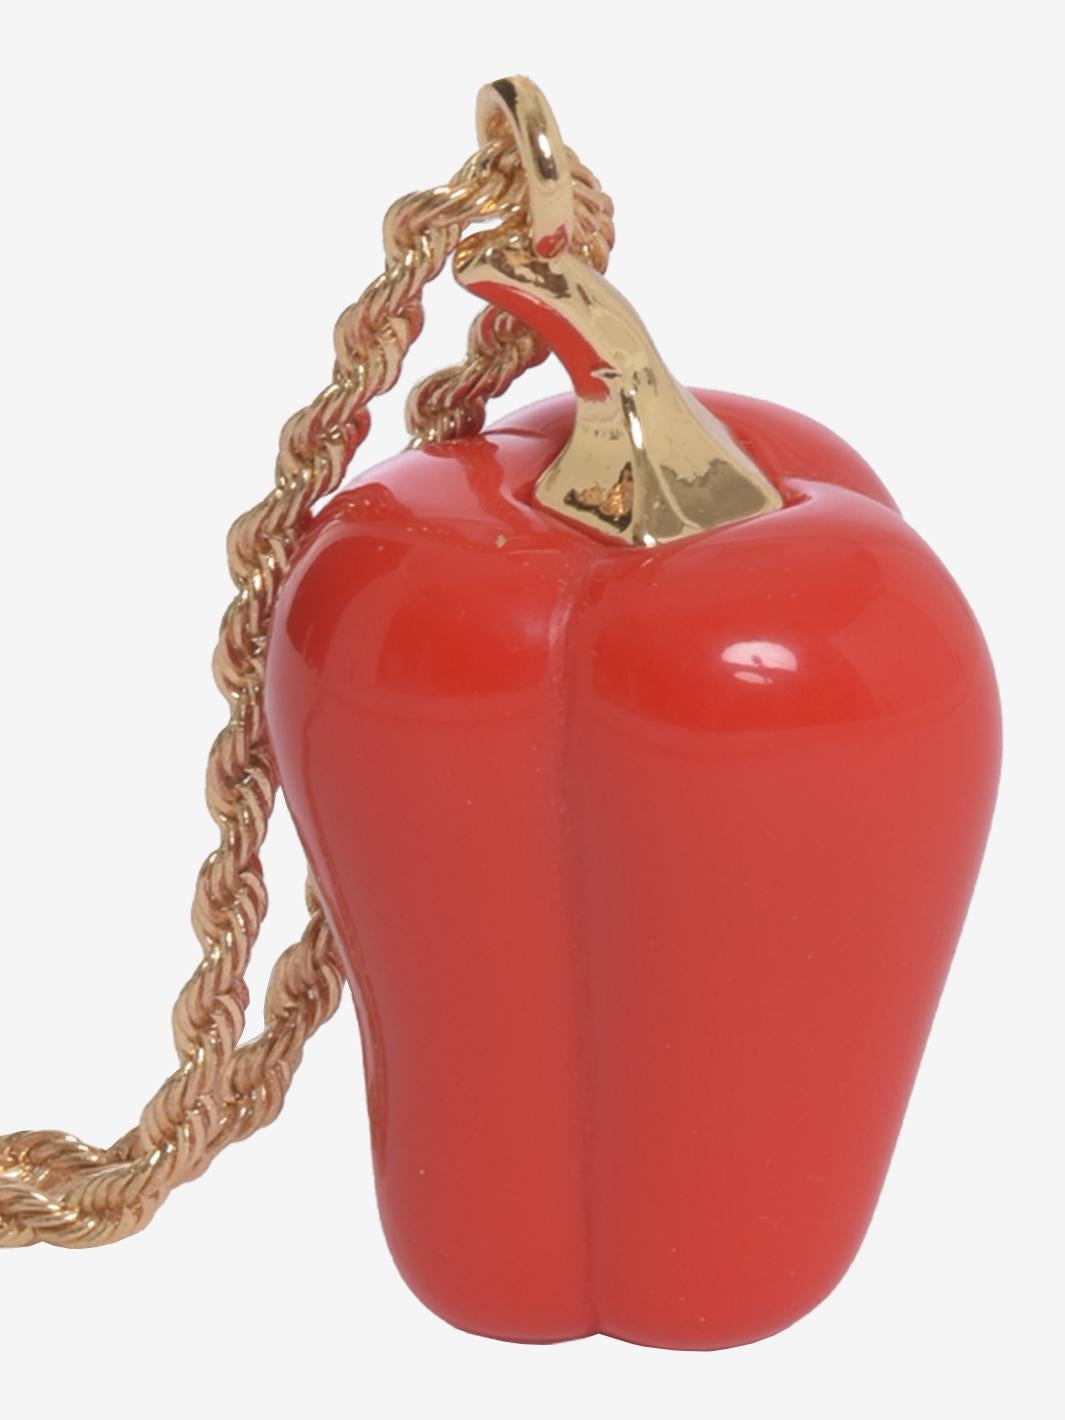 Kenneth Jay Lane Red Bell Pepper Necklace is made by red resin bell pepper decorated with Hamilton gold-plated American pewter casting. 
Lane started designing jewelry and launched his business in 1963 while producing bejeweled footwear for Dior and